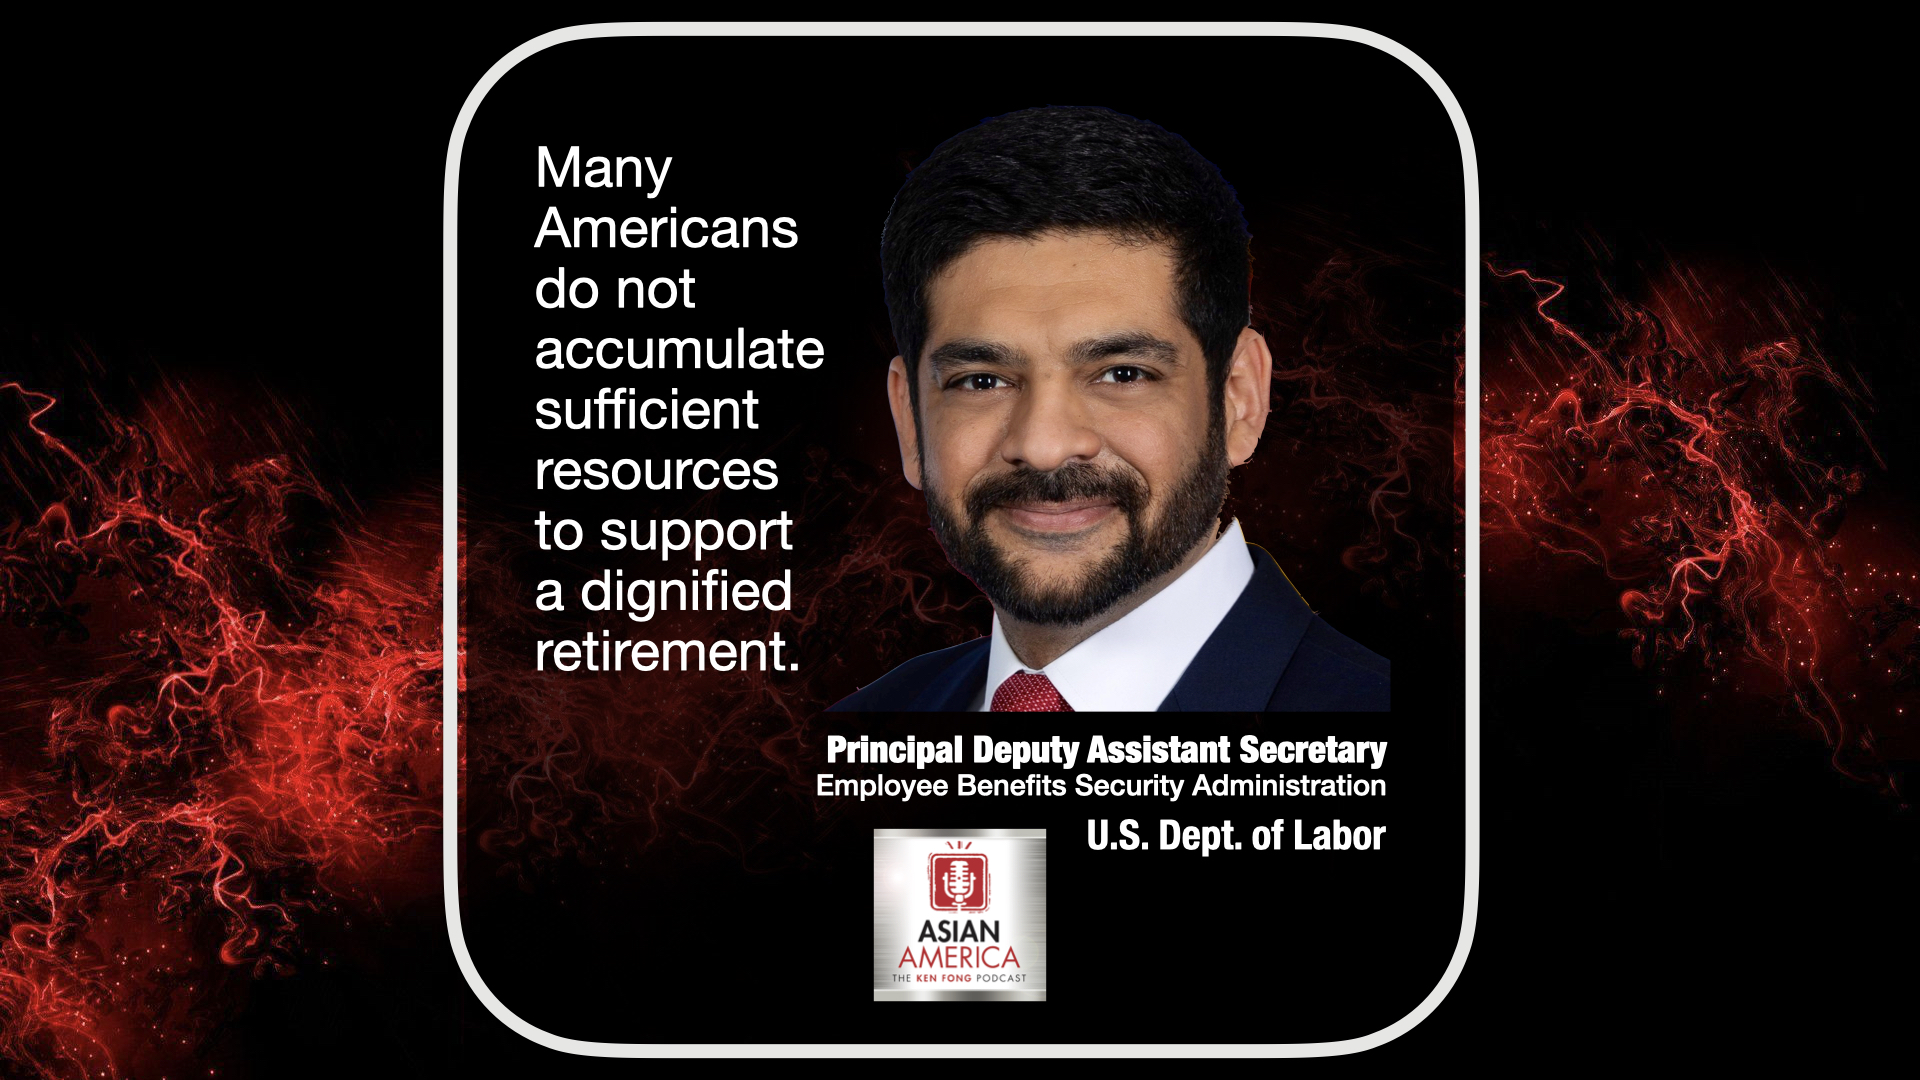 EP 463: Ali Khawar On How EBSA Is Working To Help More Americans To Save For Retirement